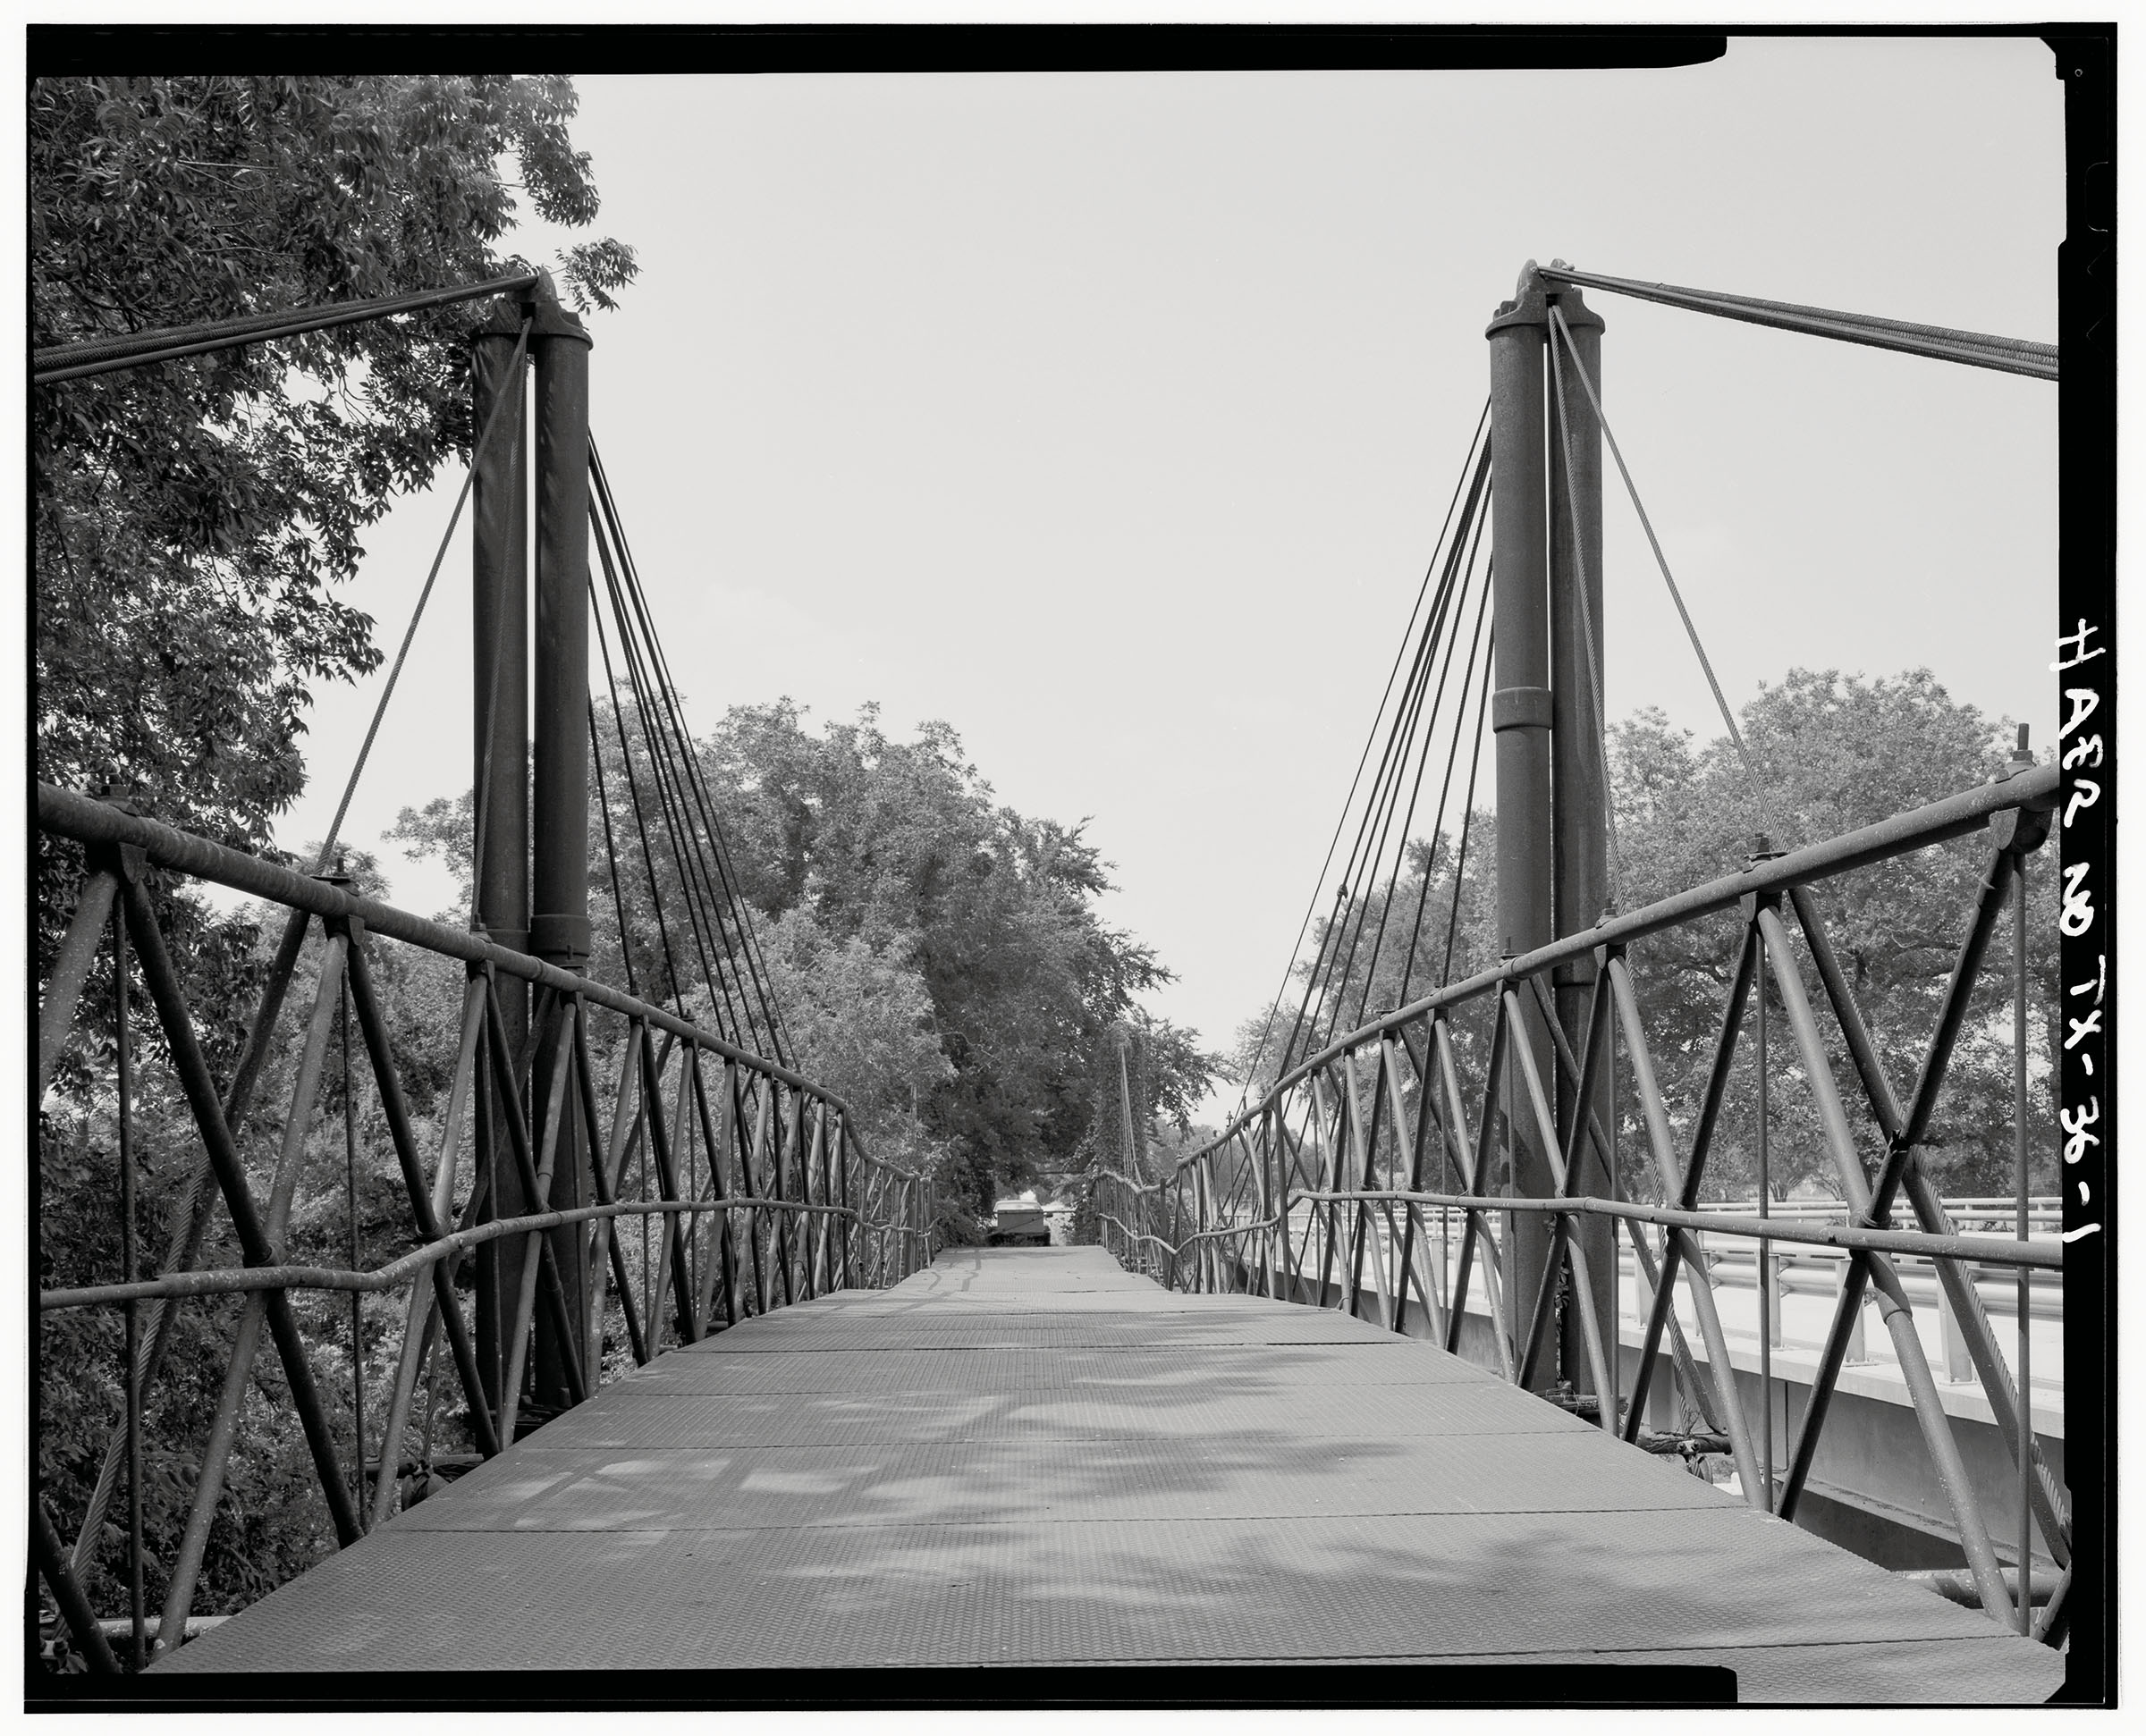 A black and white photo of a suspension bridge with a wide, flat crossing